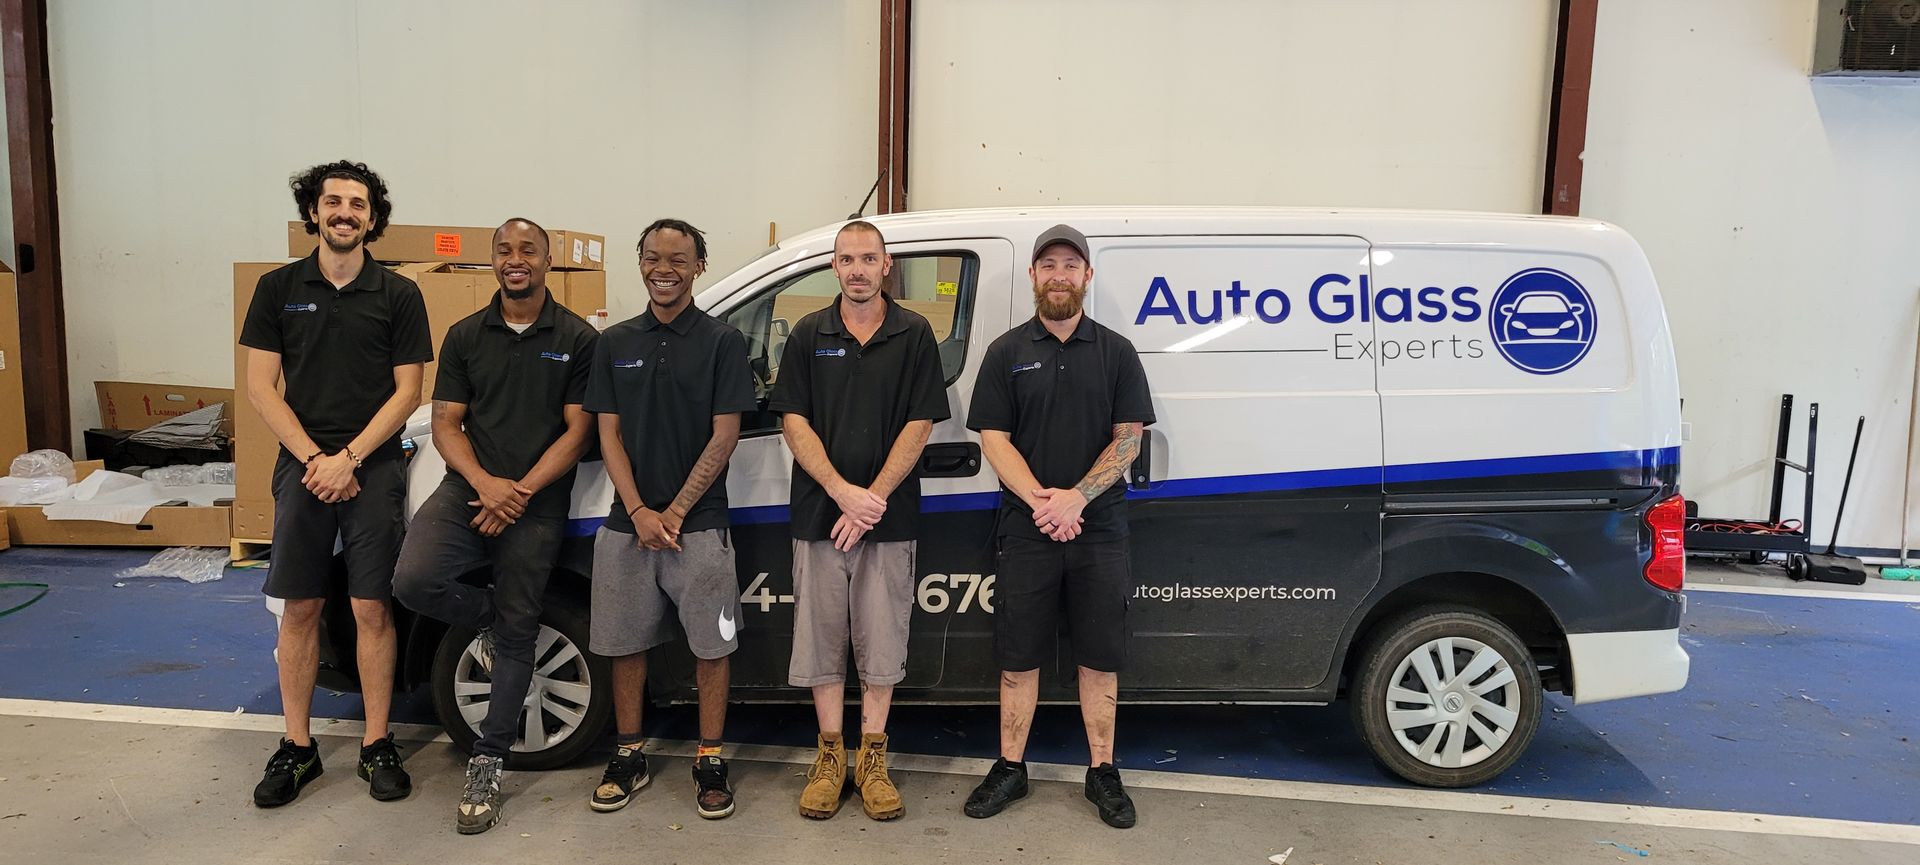 The Auto Glass Experts in Charlotte, NC